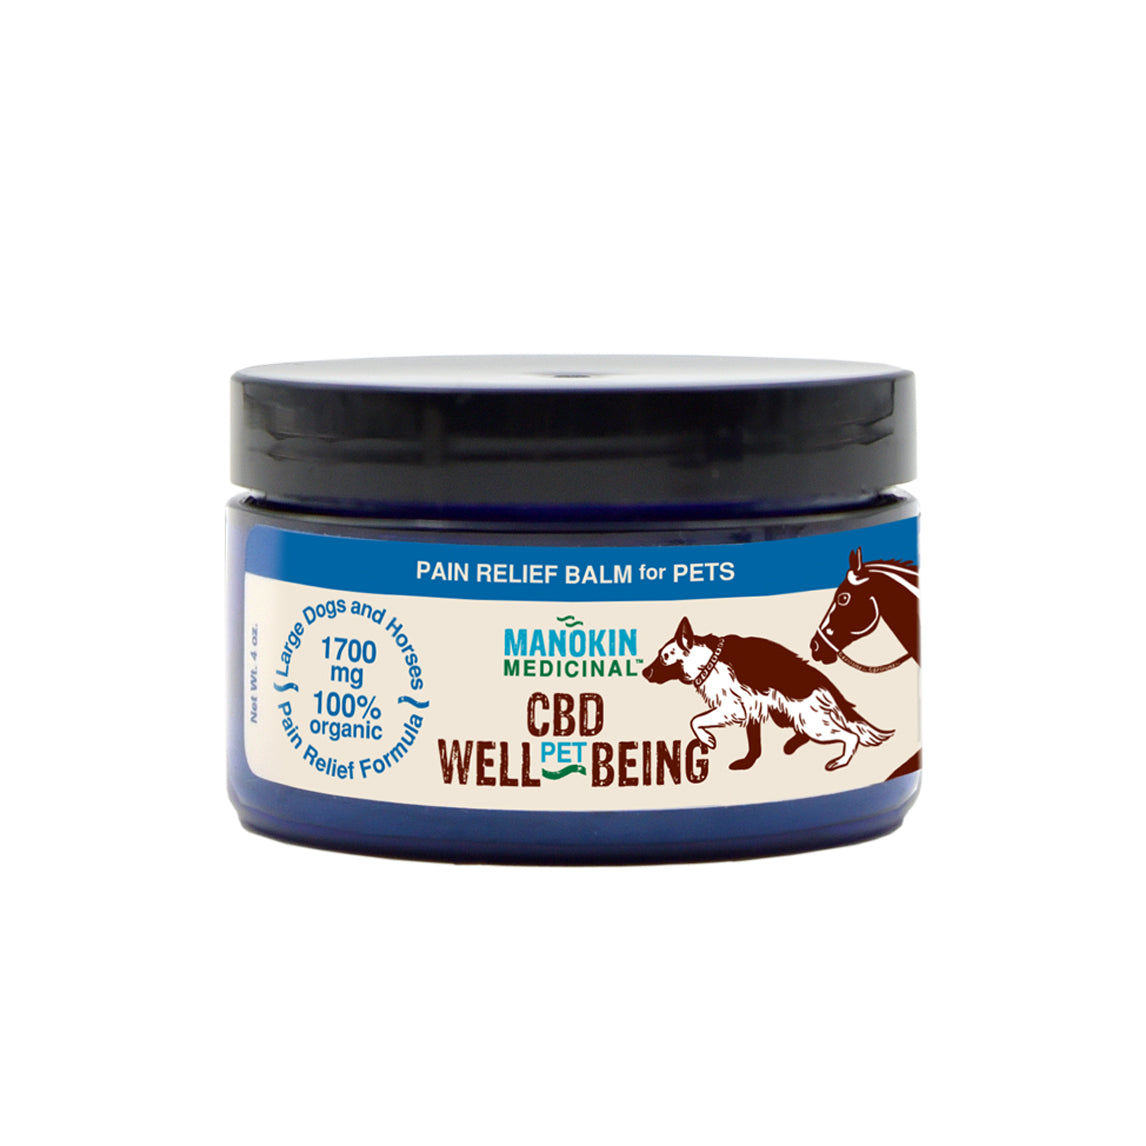 Well-Being 4oz Balm for Large Dogs and Horses 1700mg